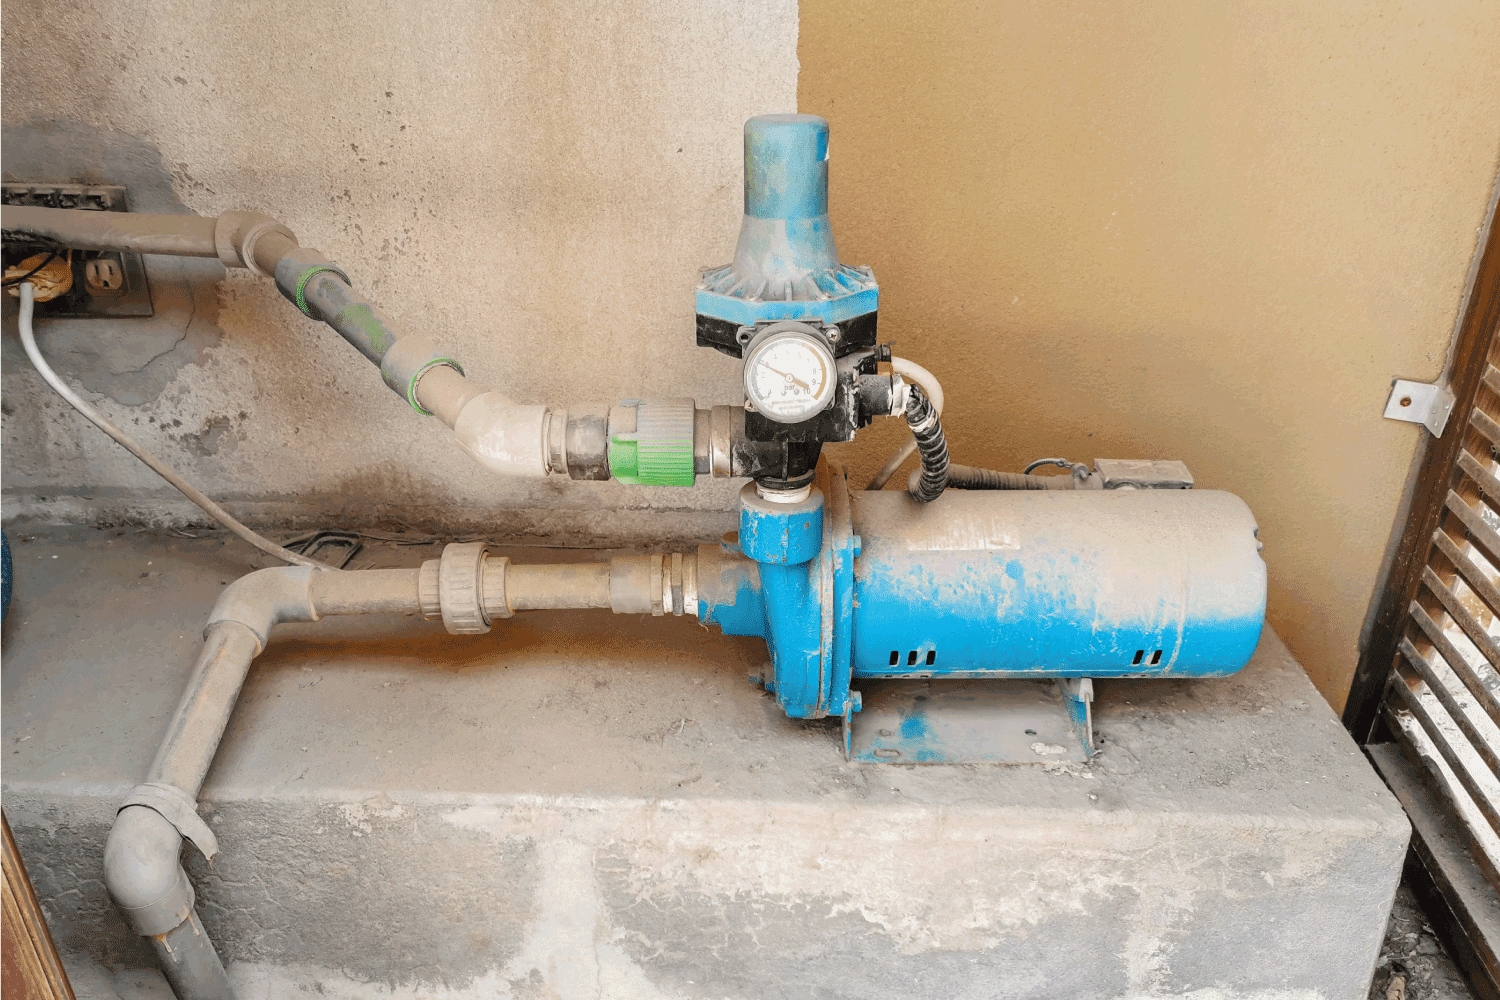 water pressure motor and it's connected pipe line